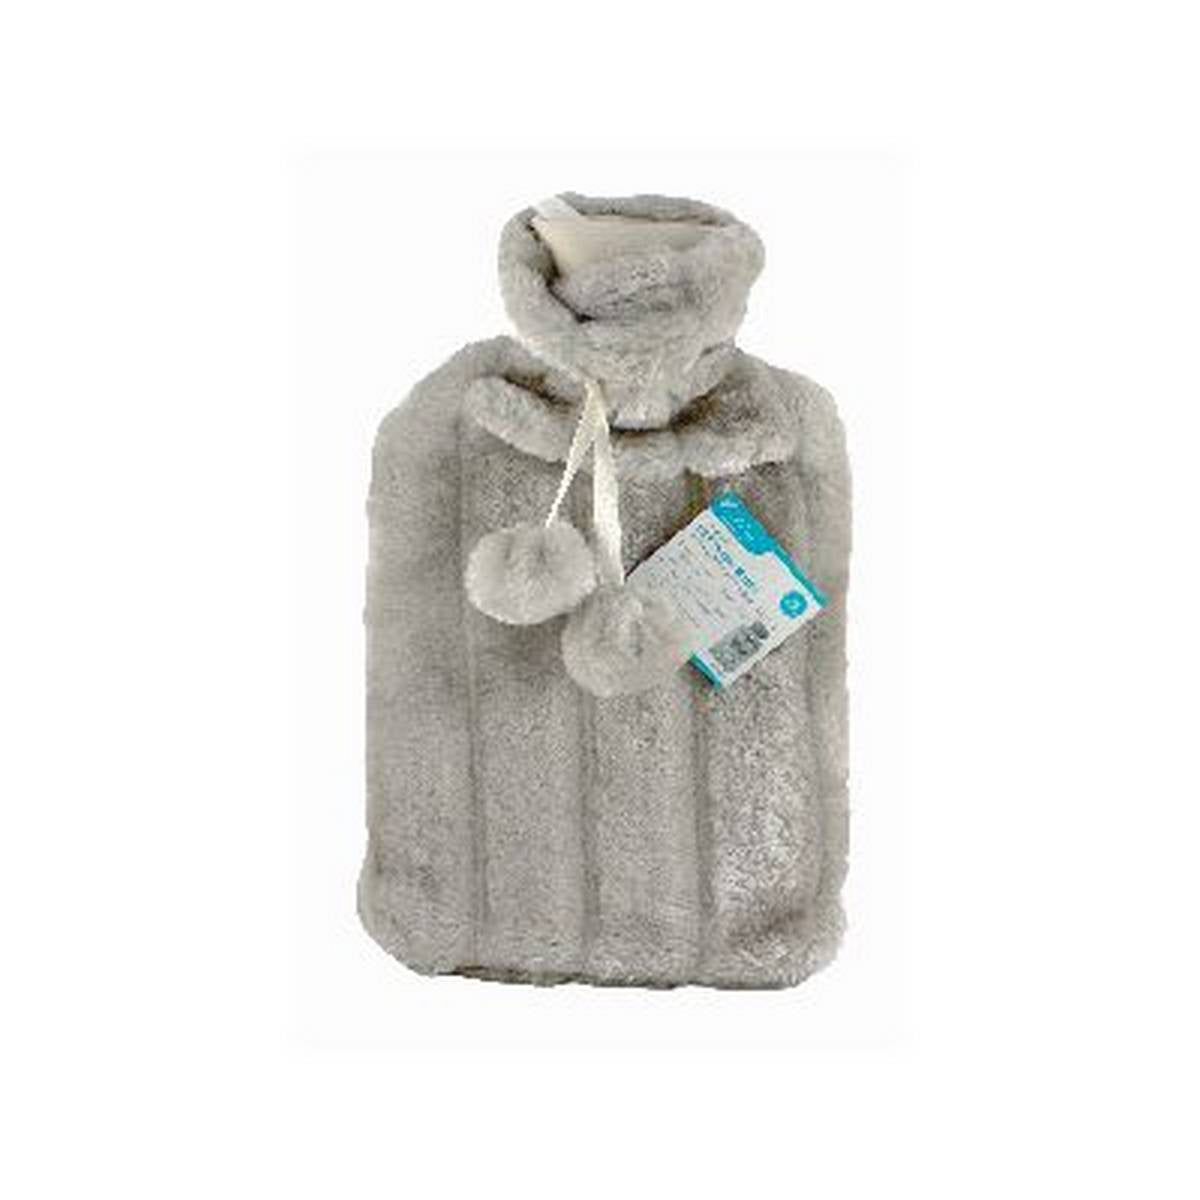 ASHLEY 2L HOT WATER BOTTLE WITH PLUSH FAUX FUR COVER - LIGHT GREY BB-HW181